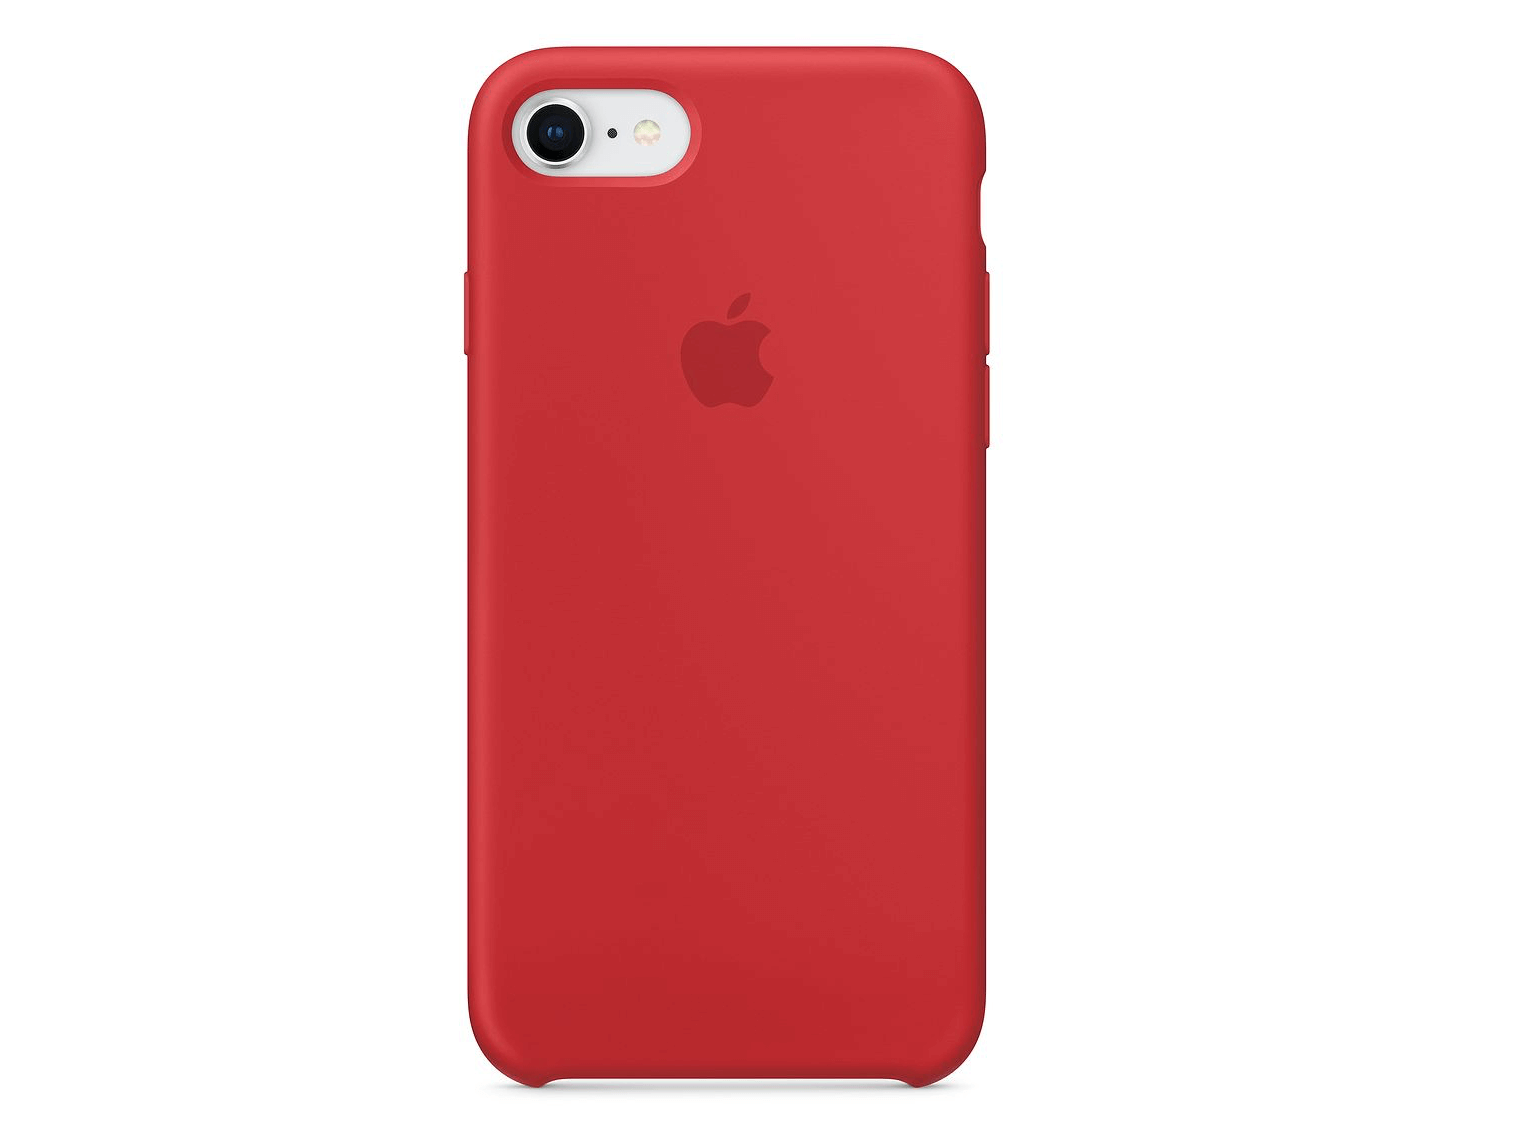 Make money when you design your own iPhone case